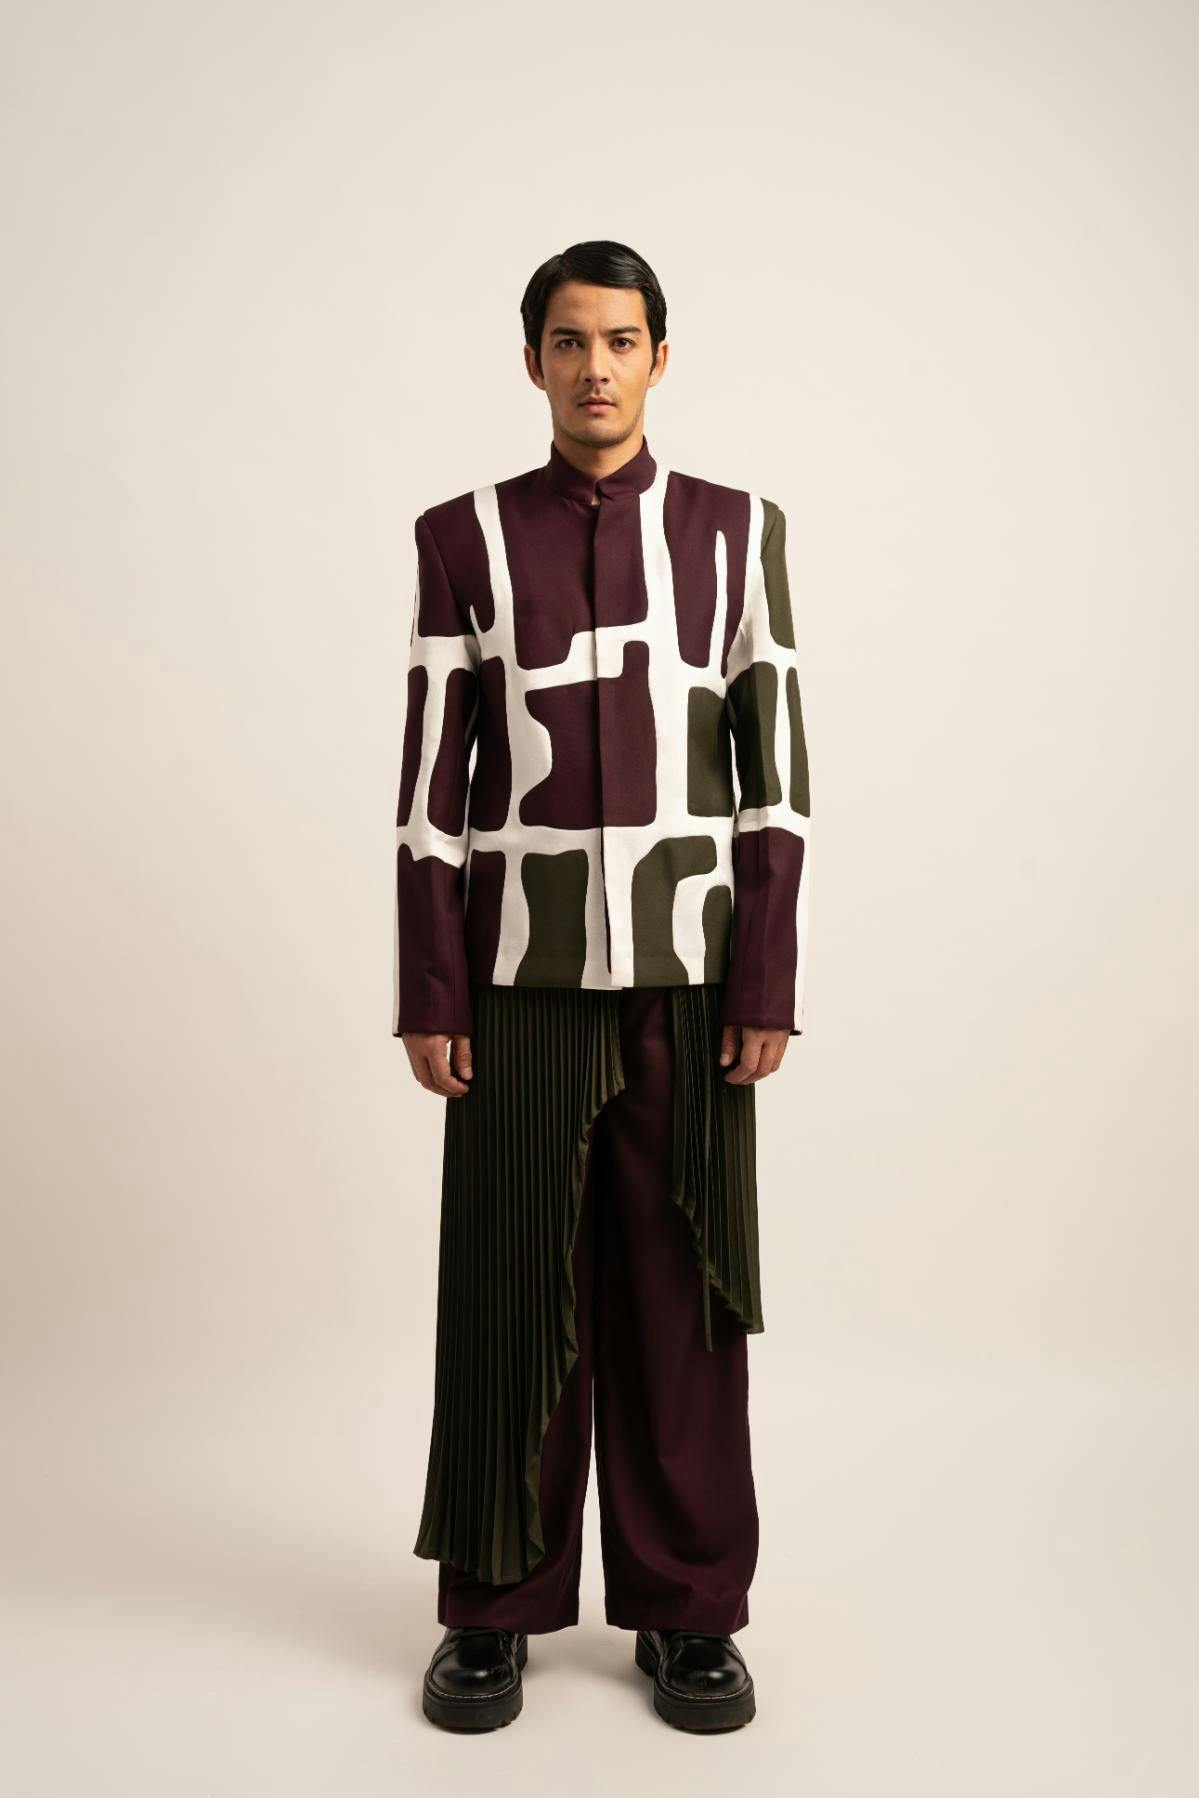 The Chaos Cascade Trouser Set, a product by Siddhant Agrawal Label